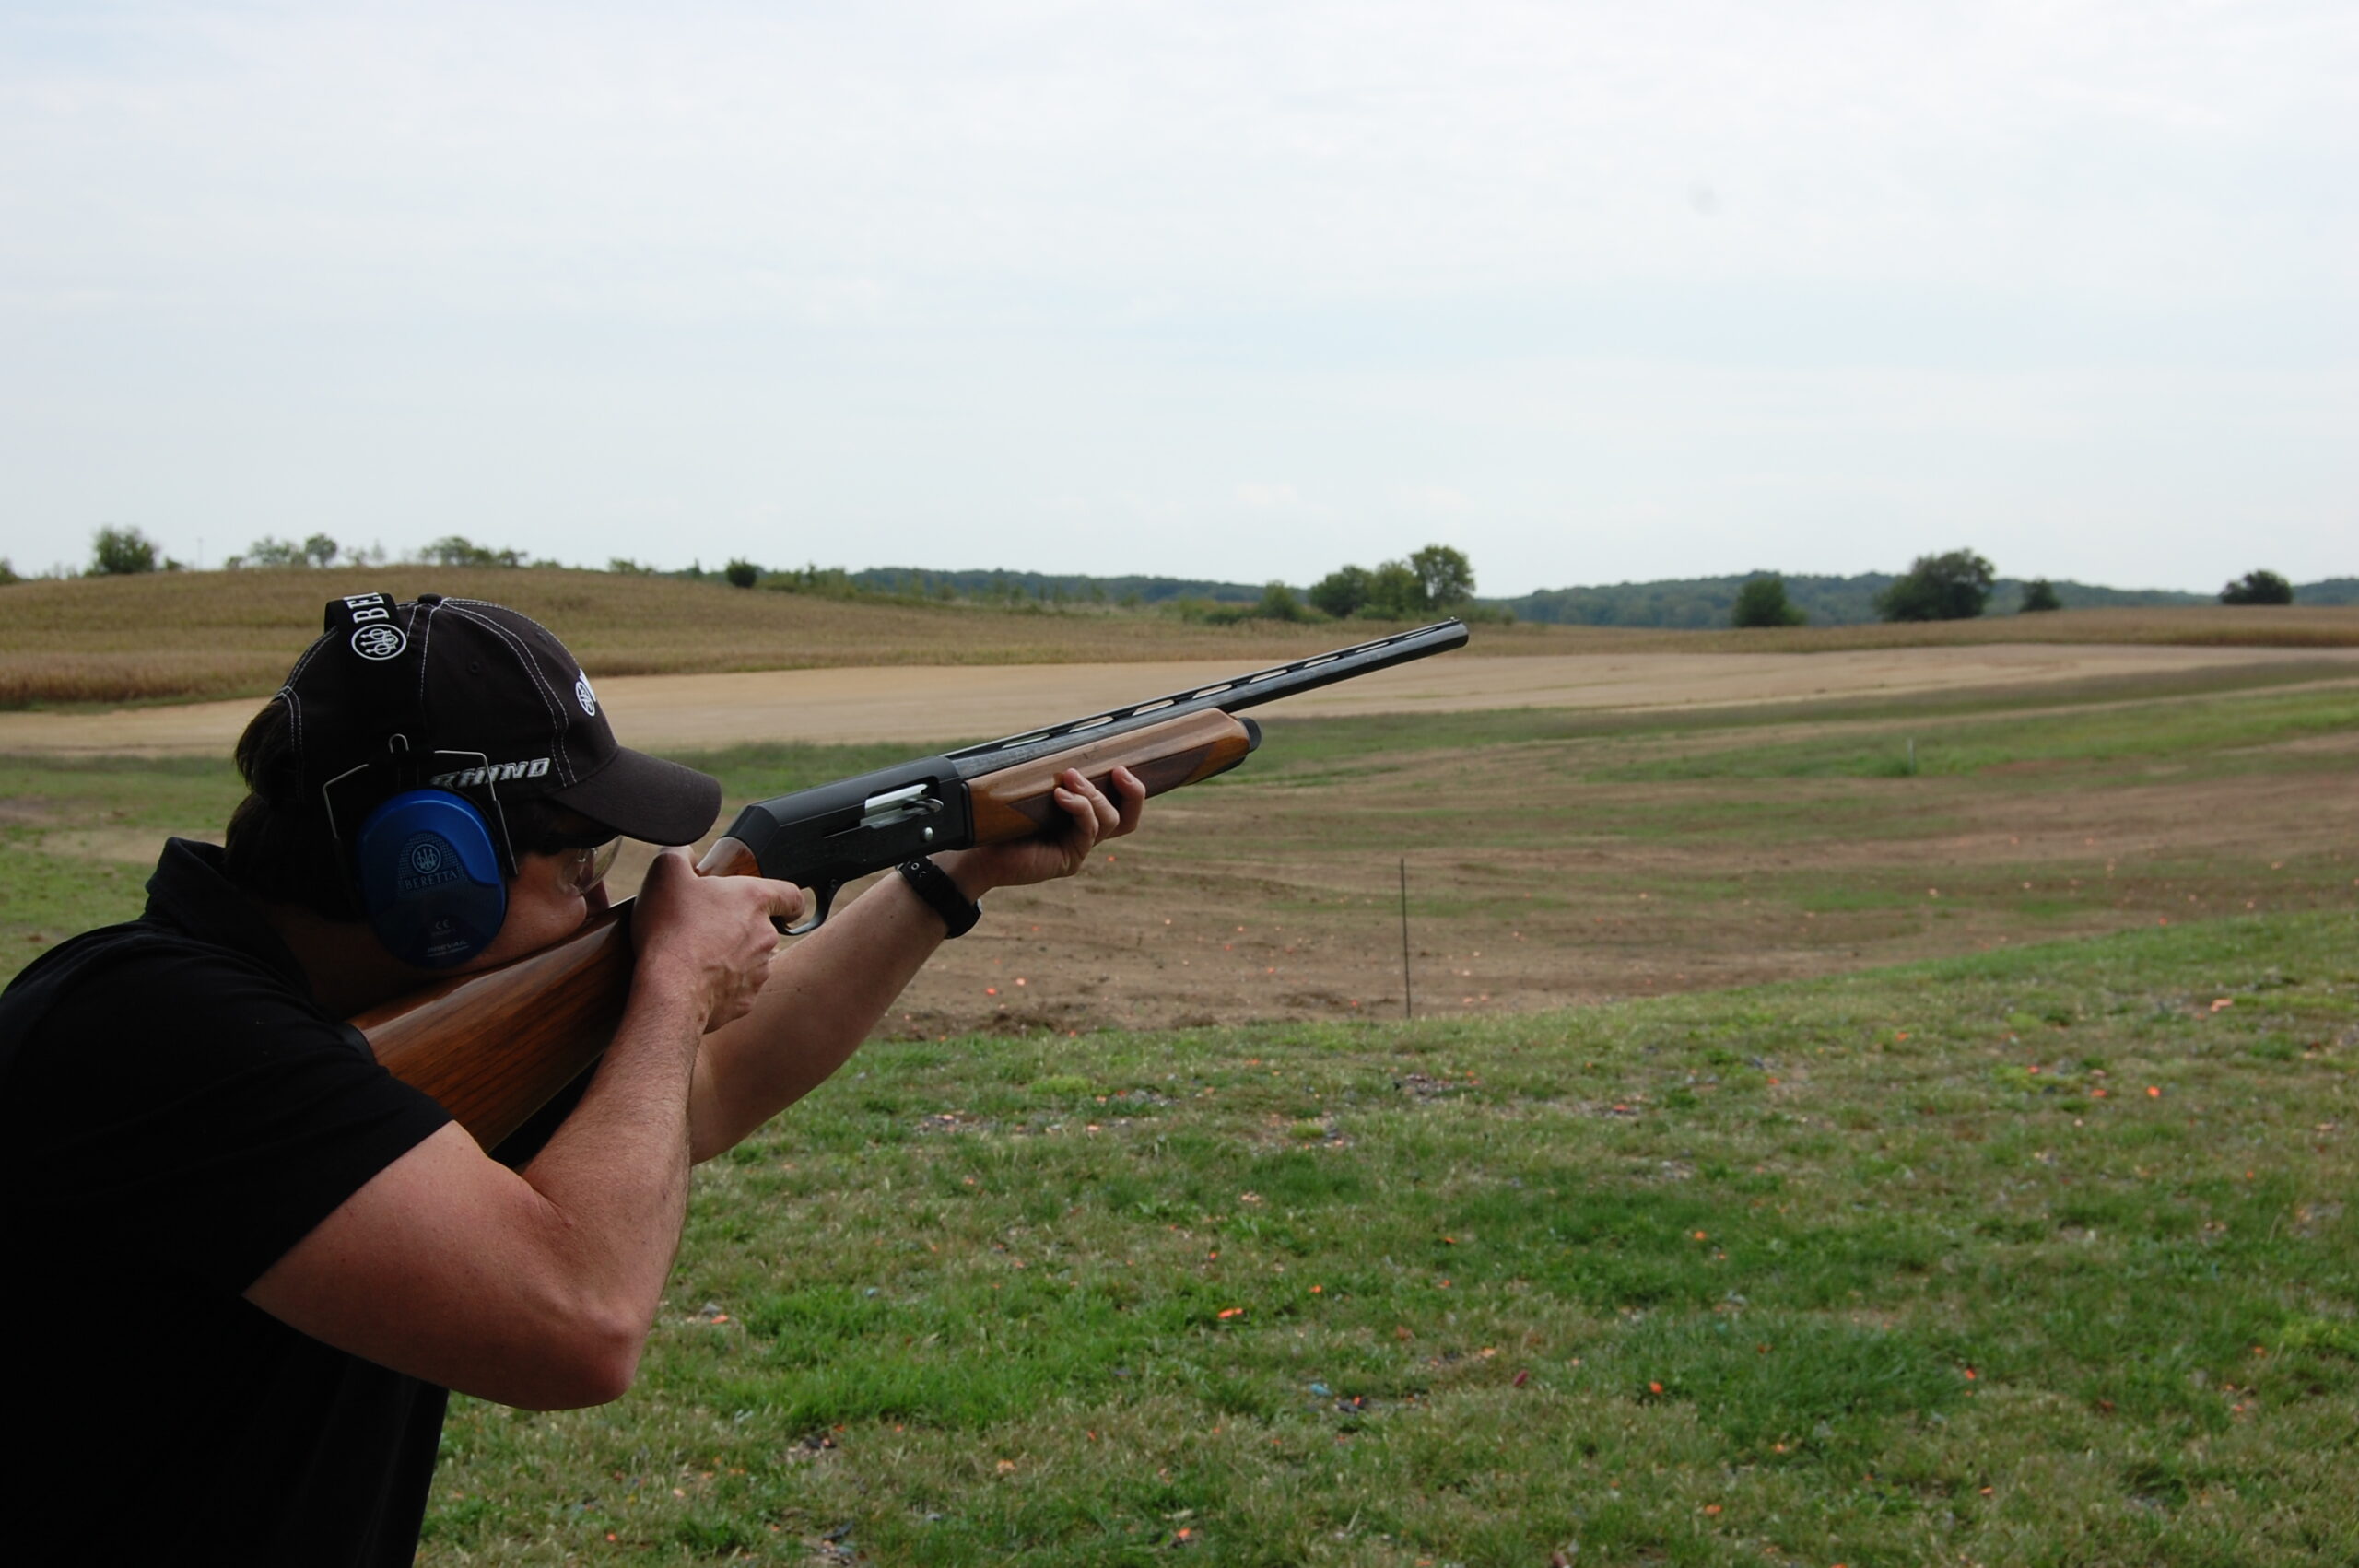 Shooting skeet with the A390.